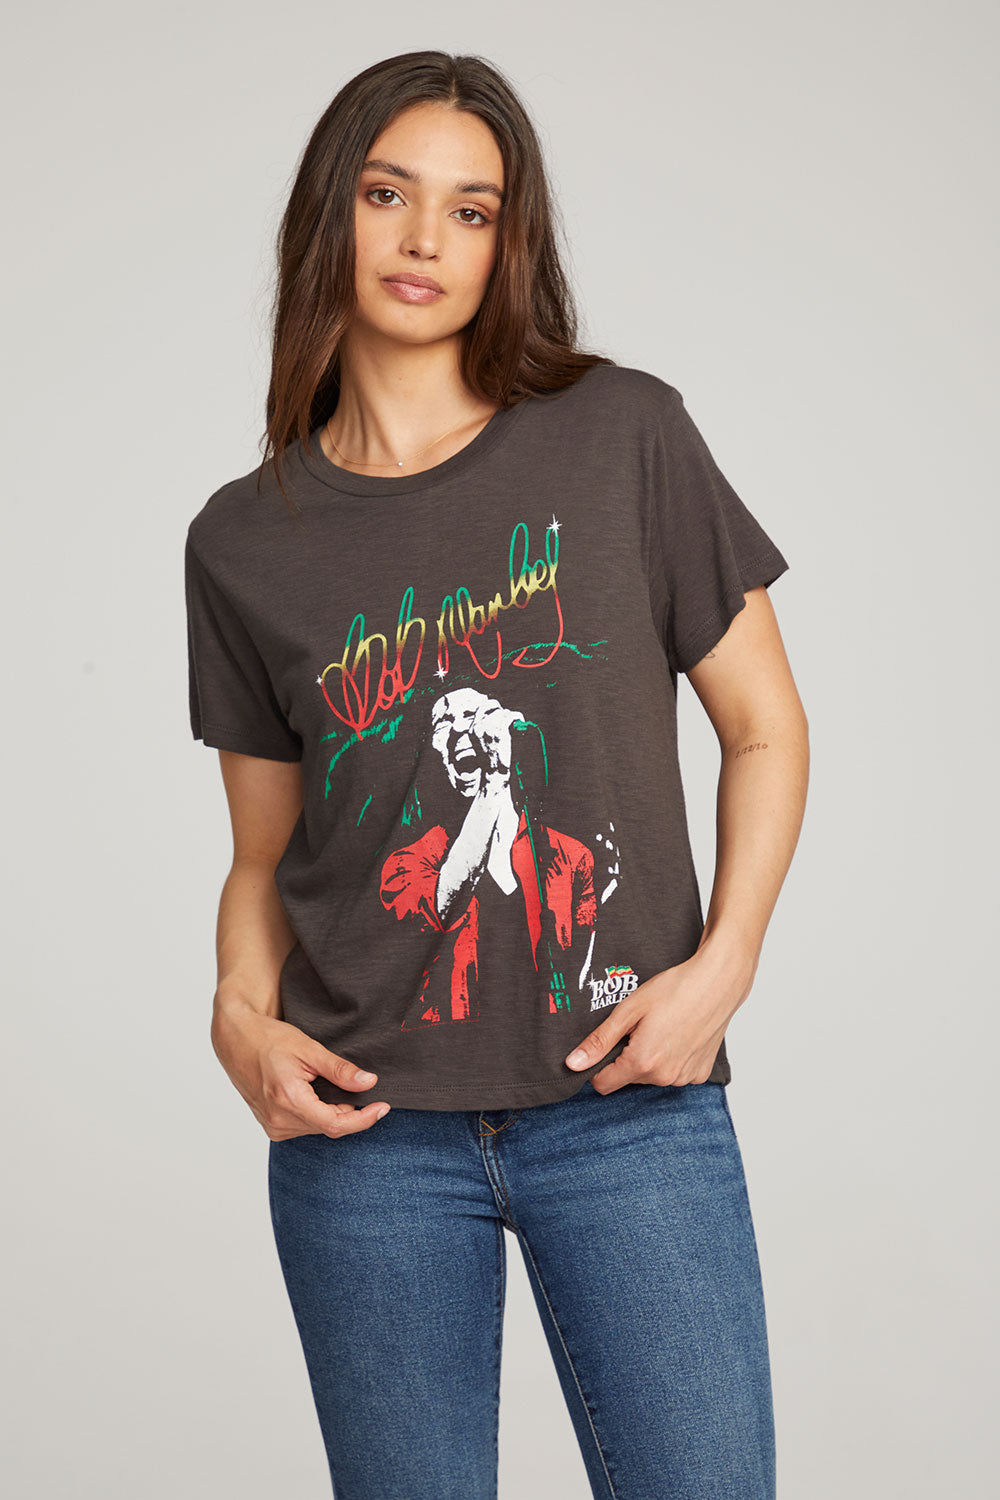 Bob Marley Live On Stage Tee WOMENS chaserbrand